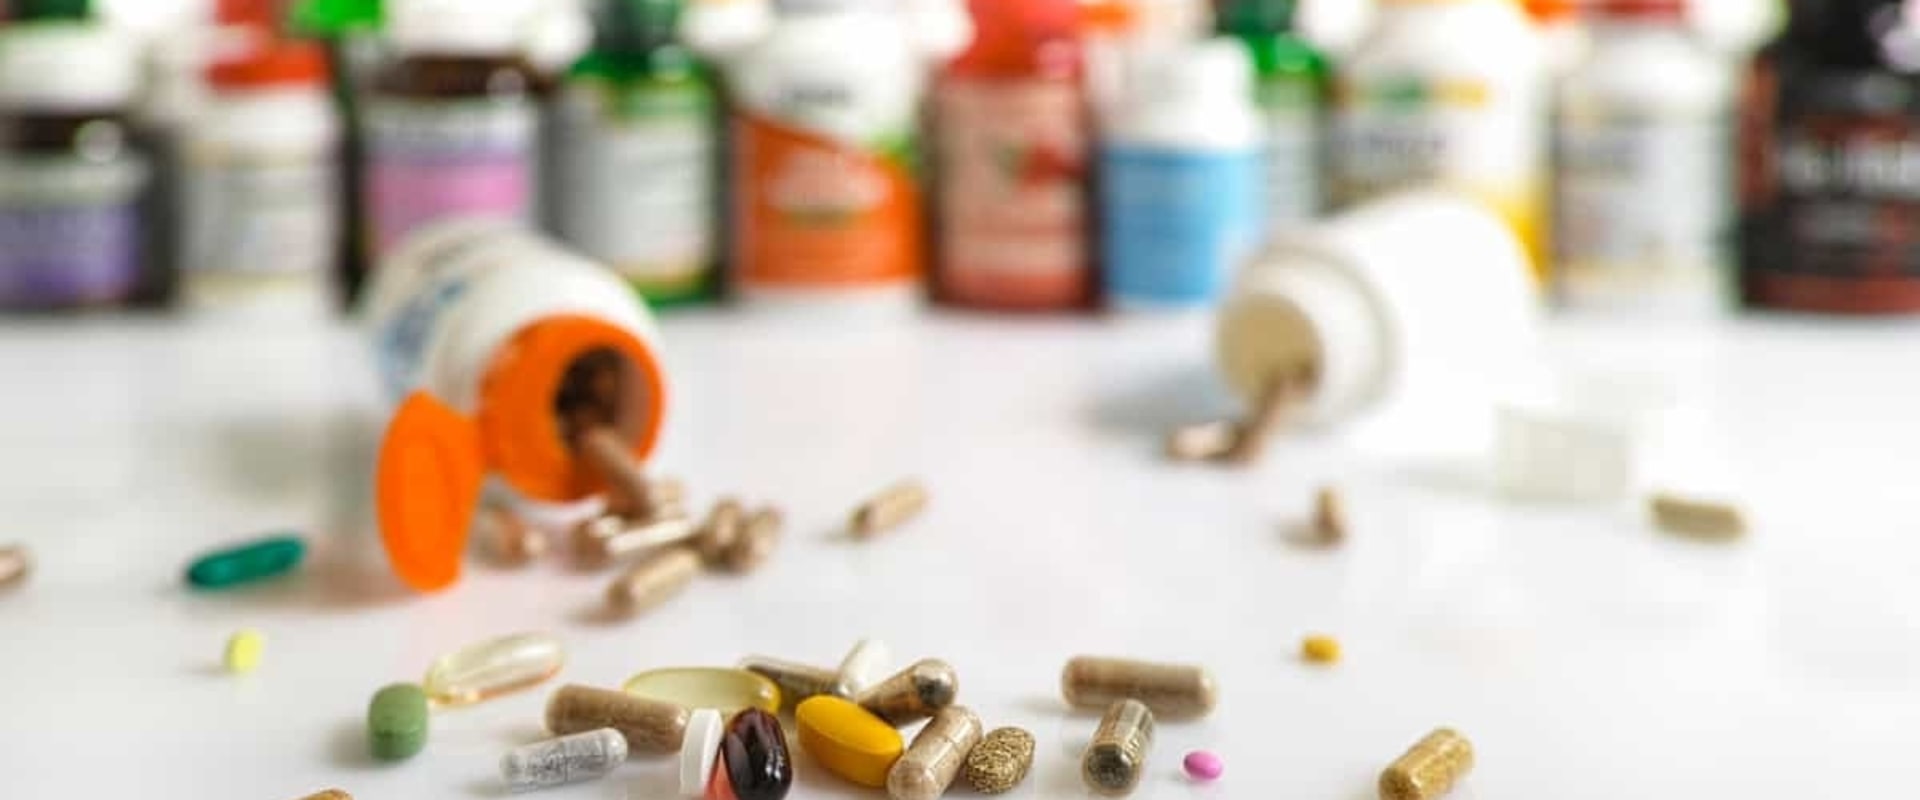 What are the negative effects of food supplements?